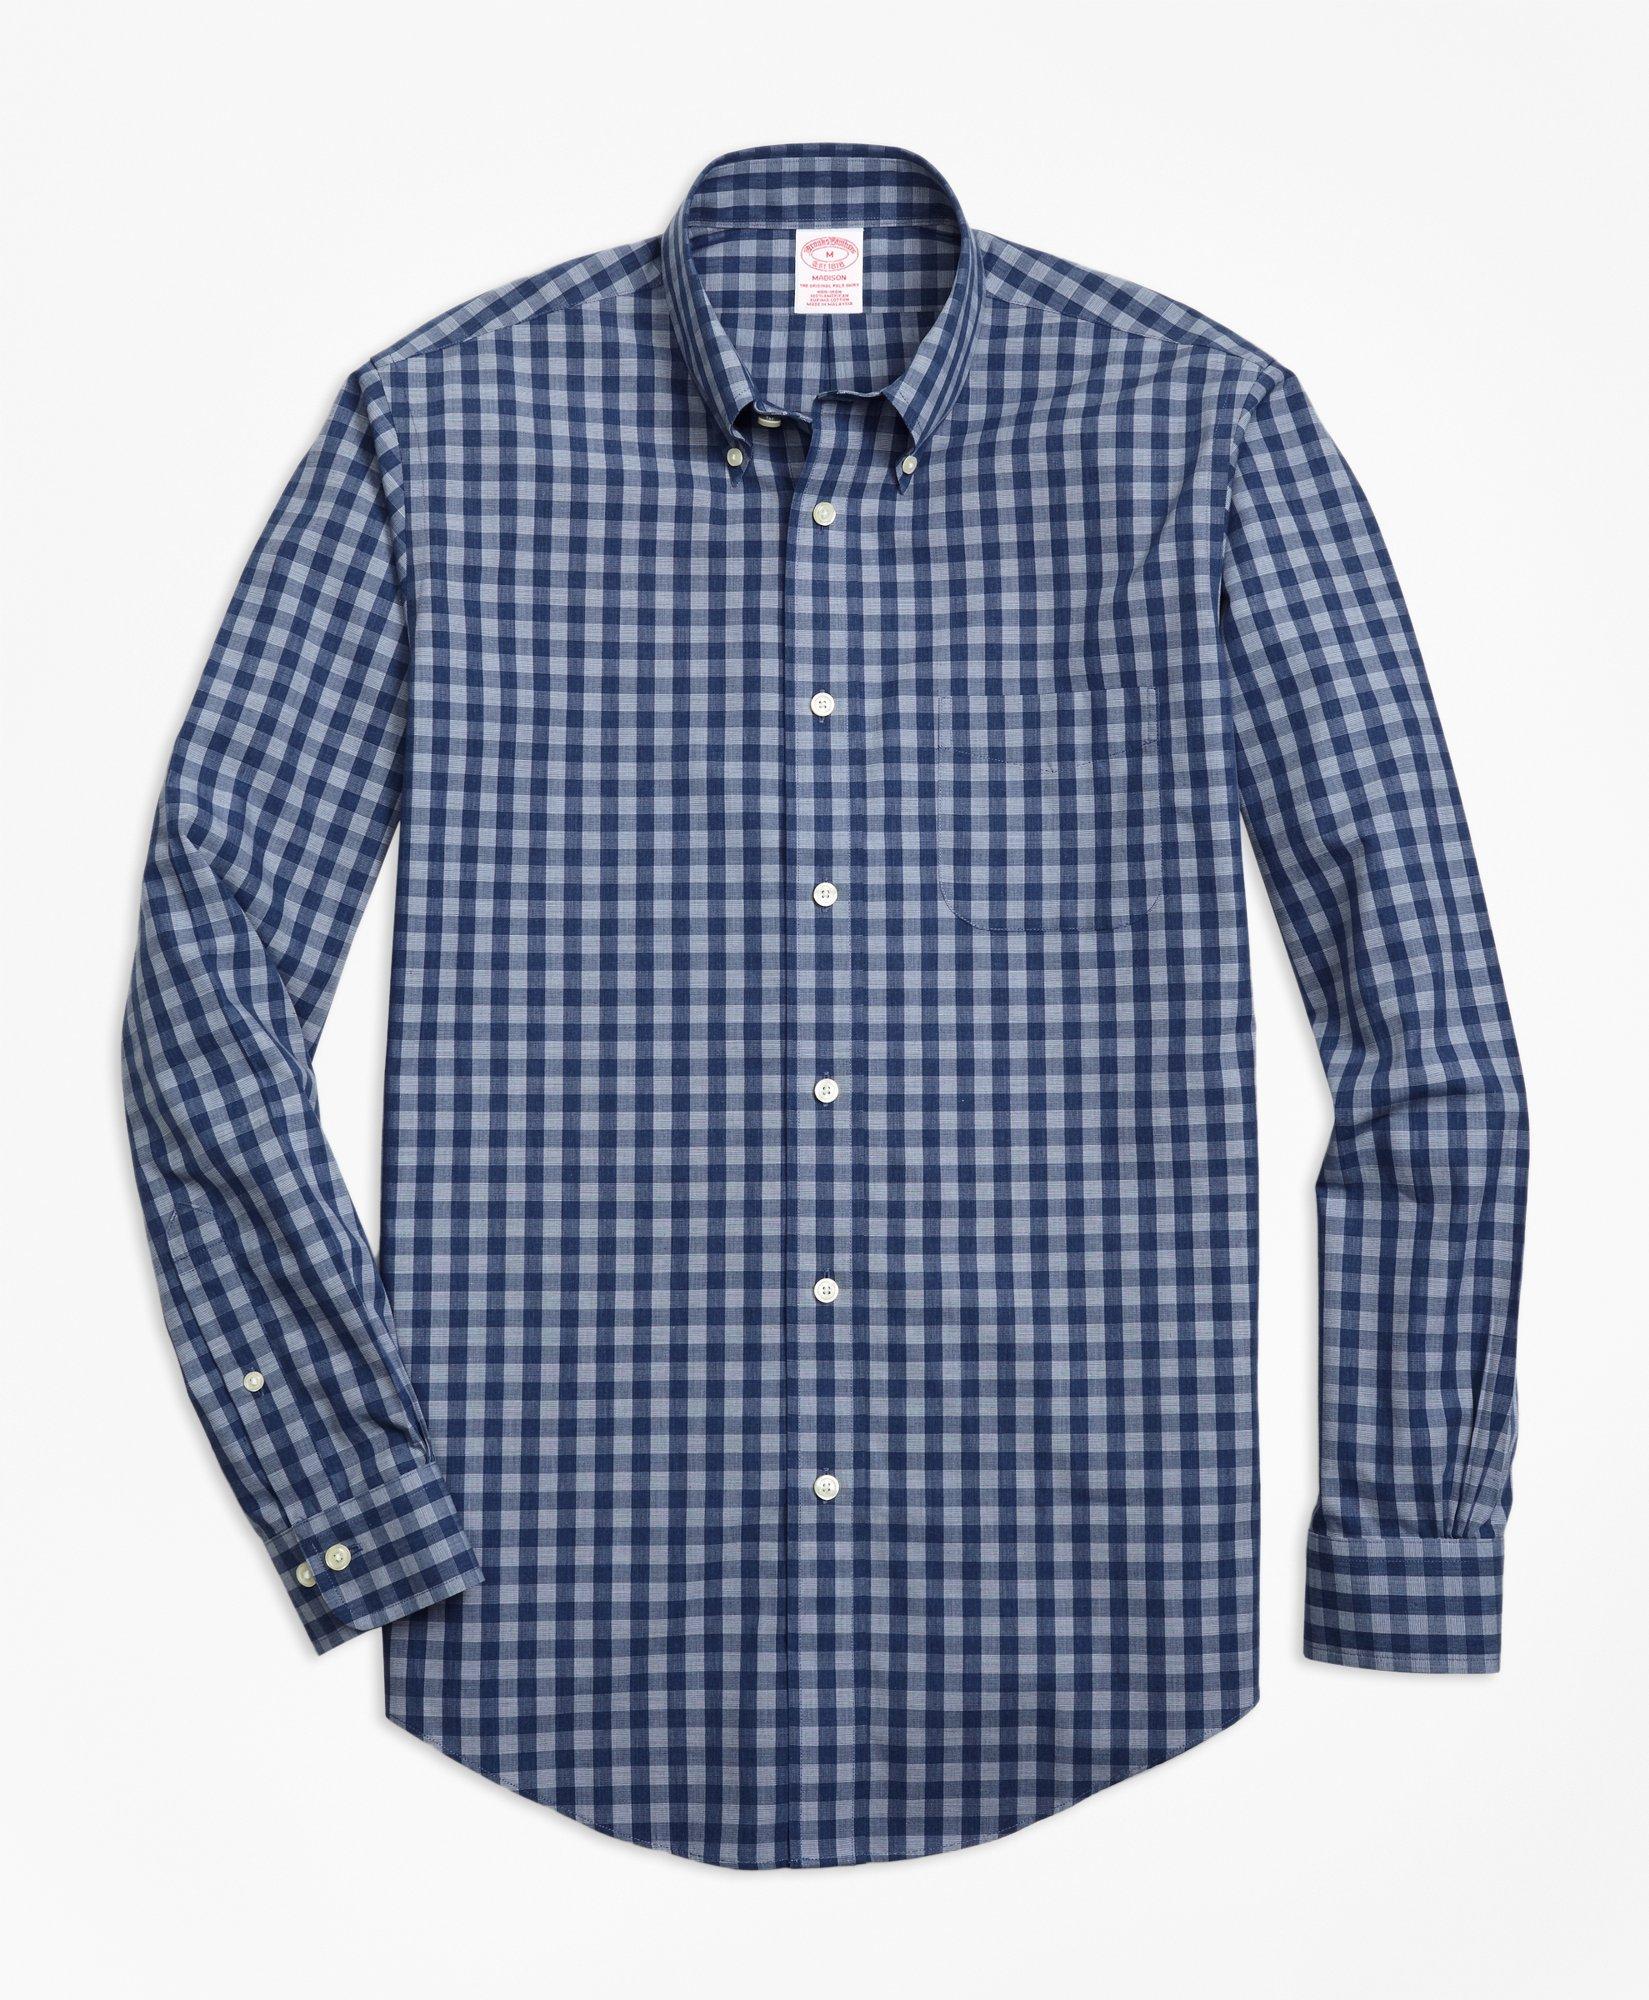 Madison Relaxed-Fit Sport Shirt, Non-Iron Heathered Gingham